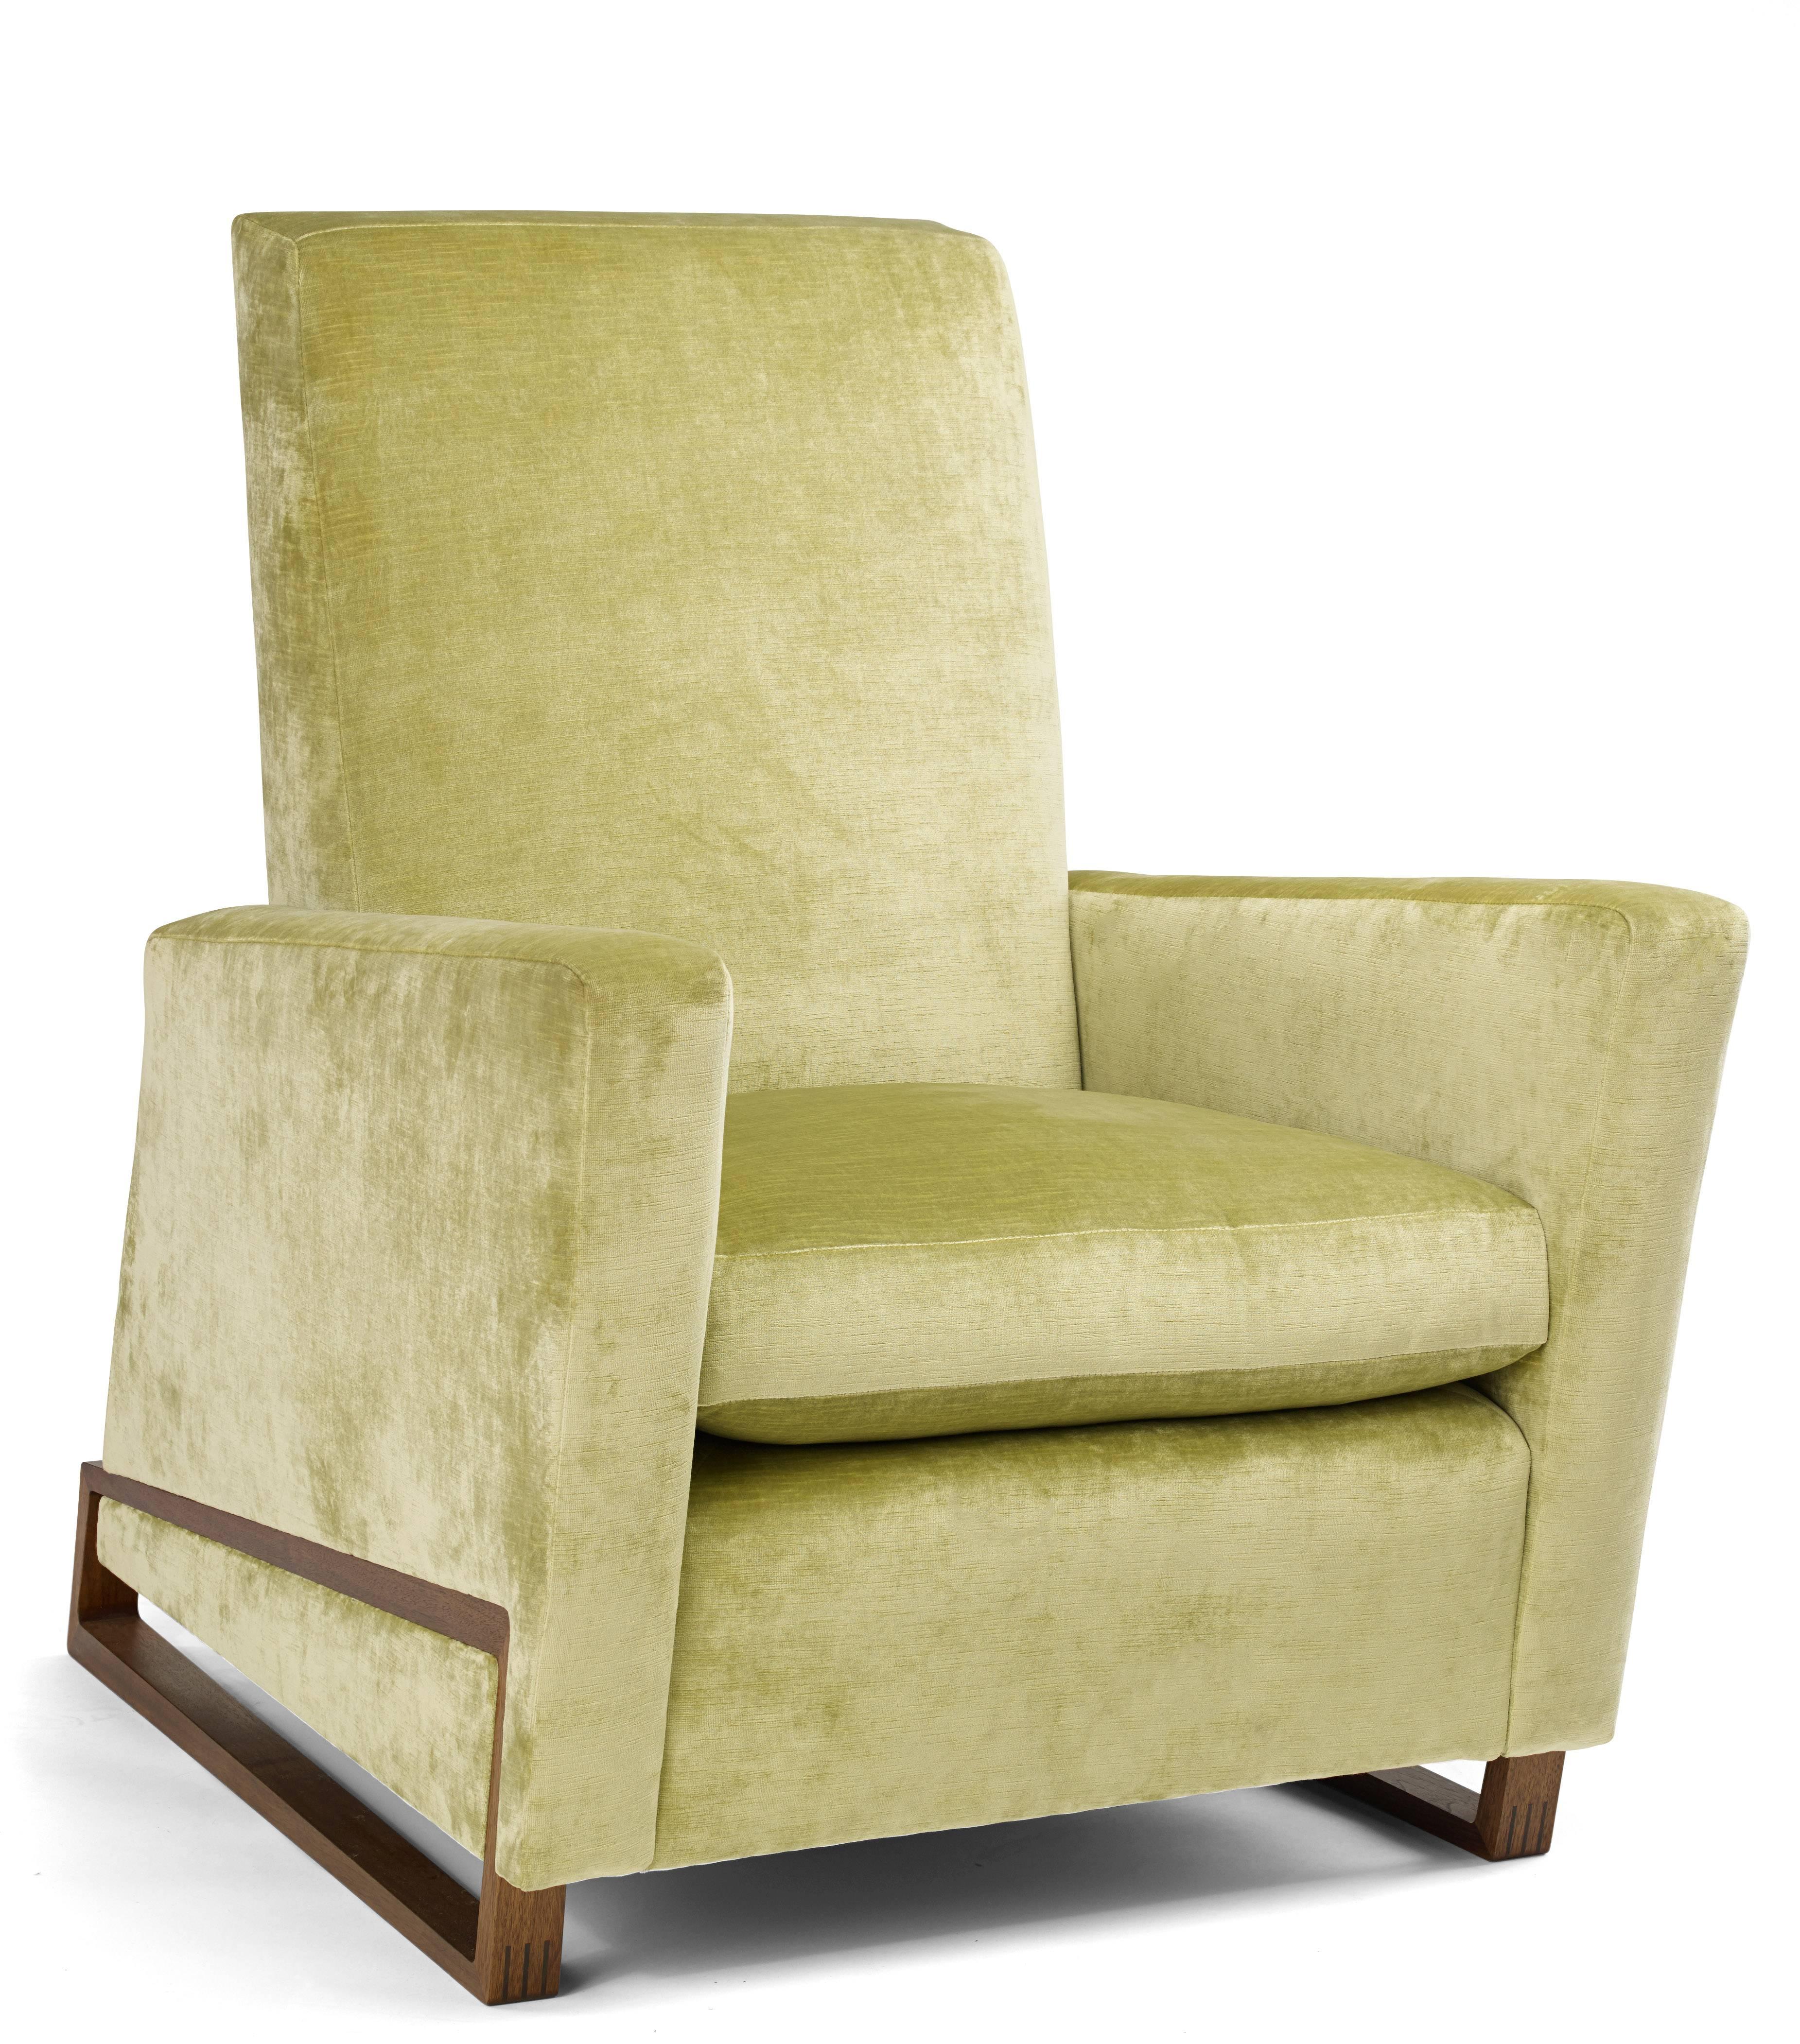 The retro chair is a handmade, contemporary armchair of superior quality in every sense. With its incredible styling and unique design features, this chair makes a statement. However, it's more than just beautiful on the outside, what's on the